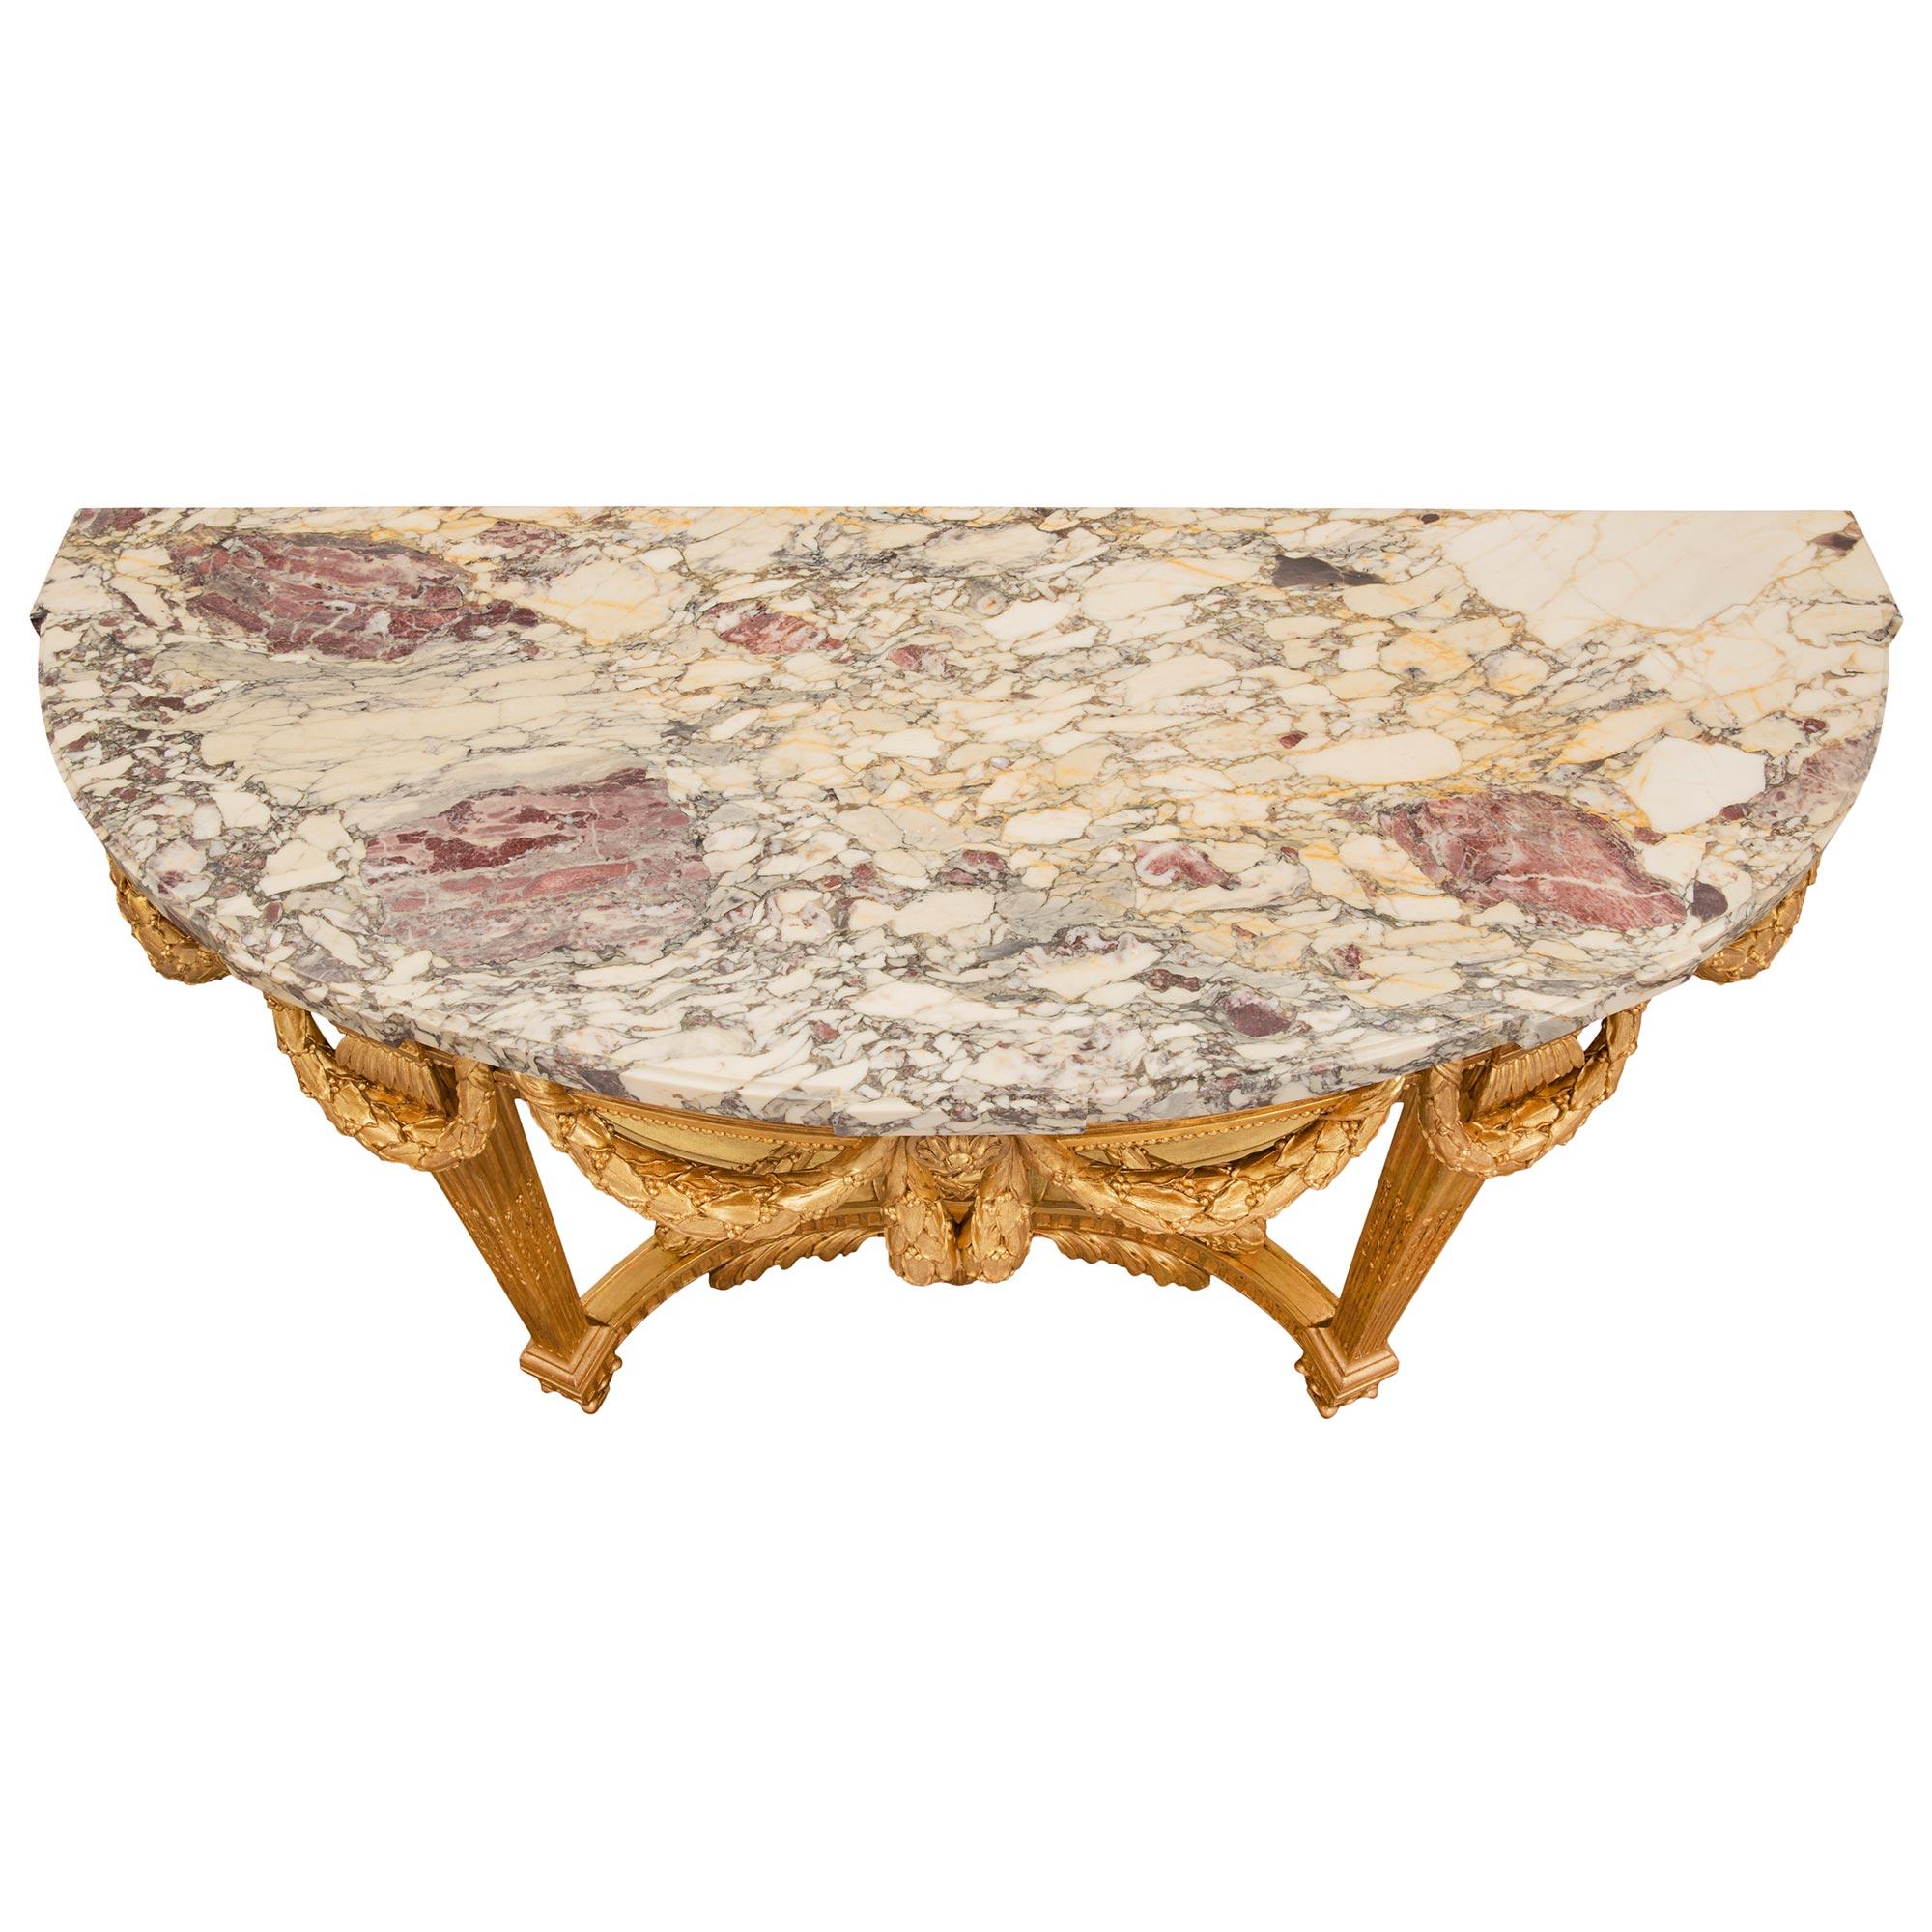 A most elegant and handsome French 19th century Louis XVI st. giltwood and Fleur de Pêcher marble console. The freestanding console is raised by fine square tapered fluted legs with beautiful foliate feet. Each leg is connected by a striking